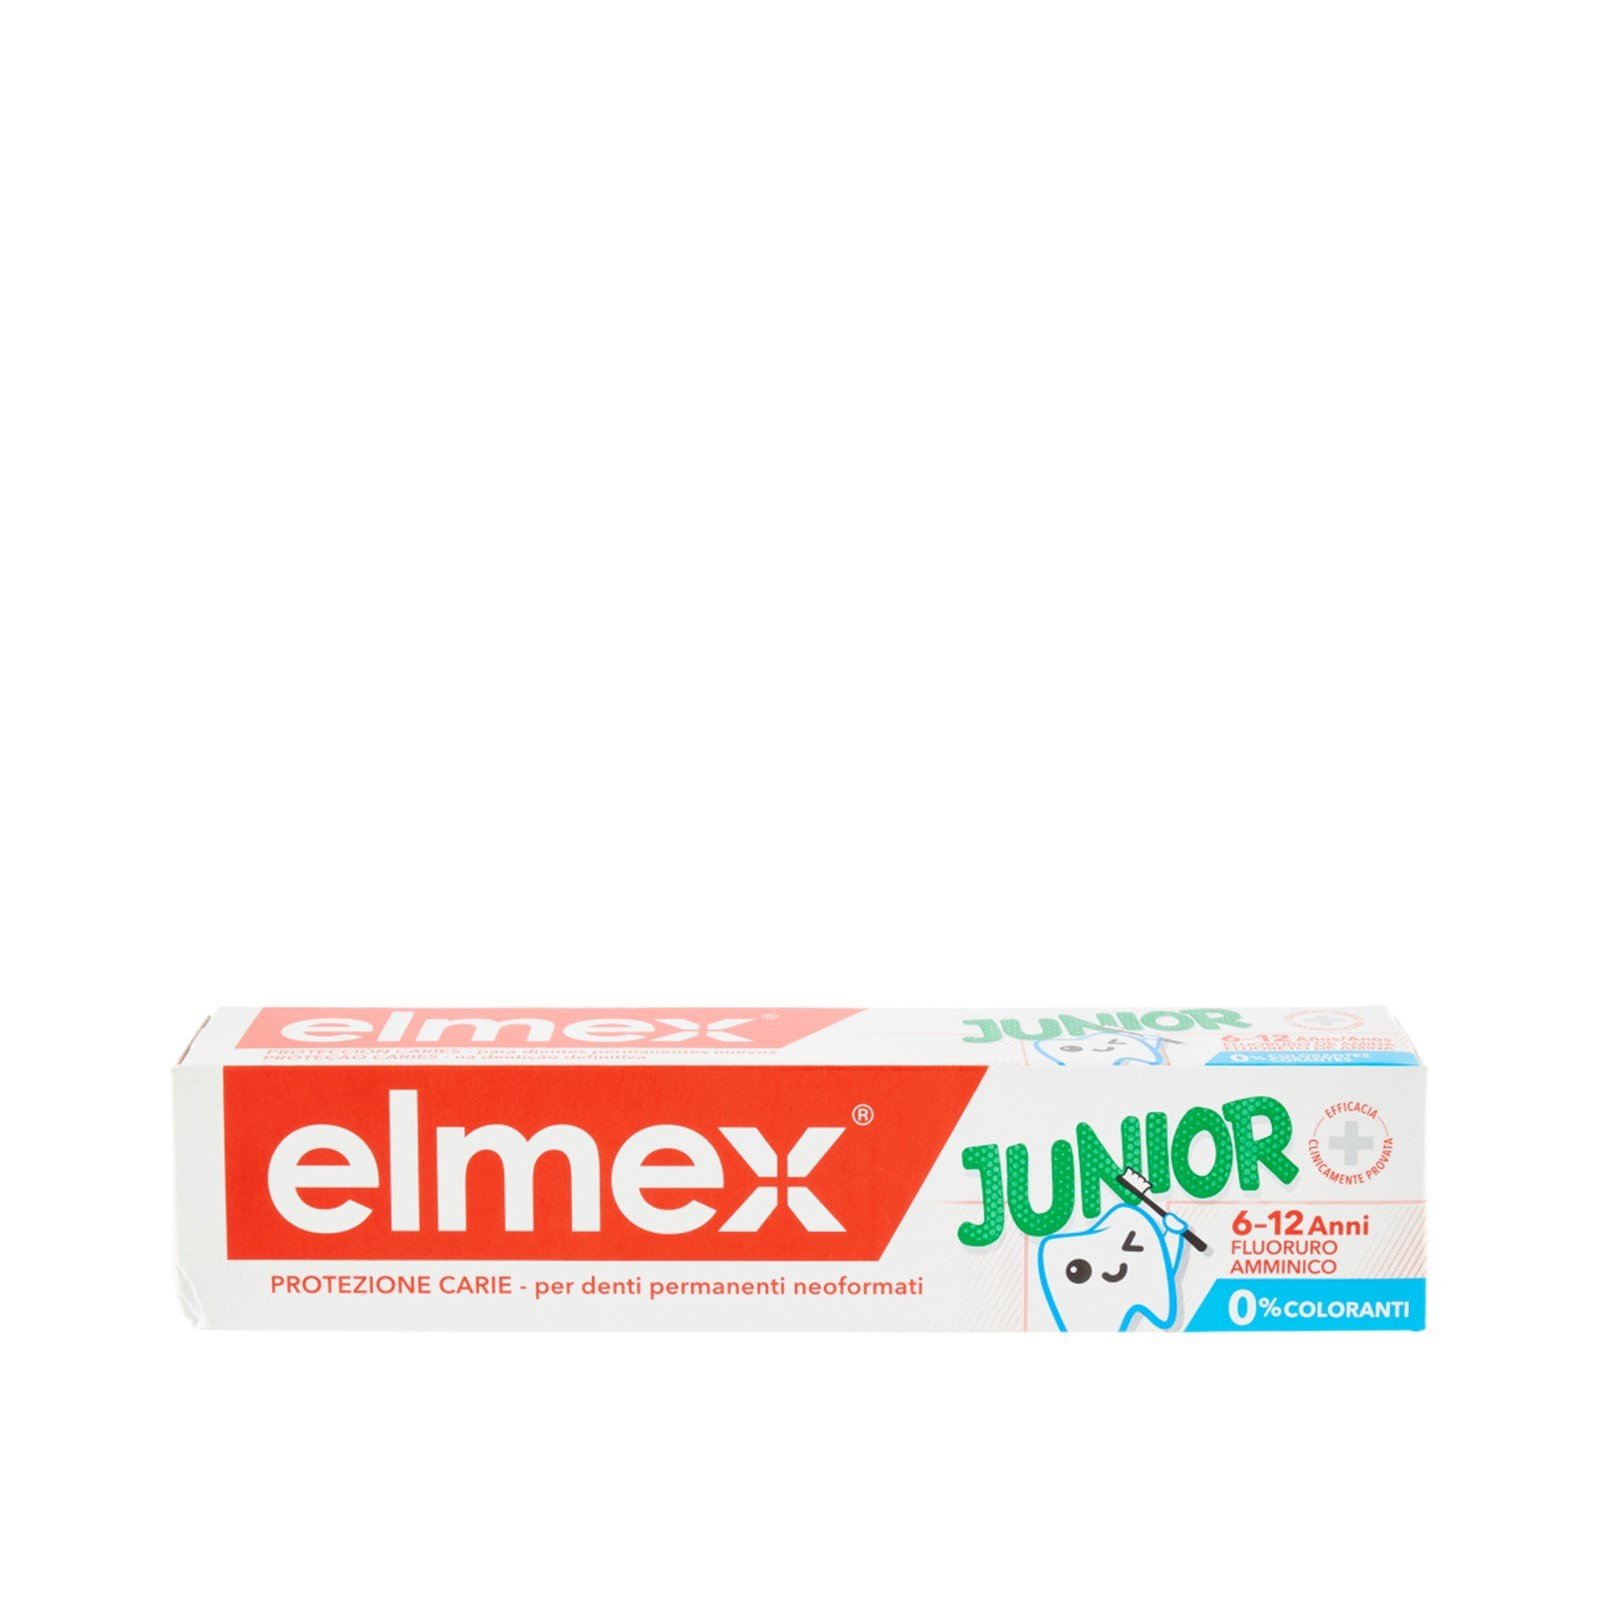 Elmex Junior Caries Protection Toothpaste 6-12 Years 75ml